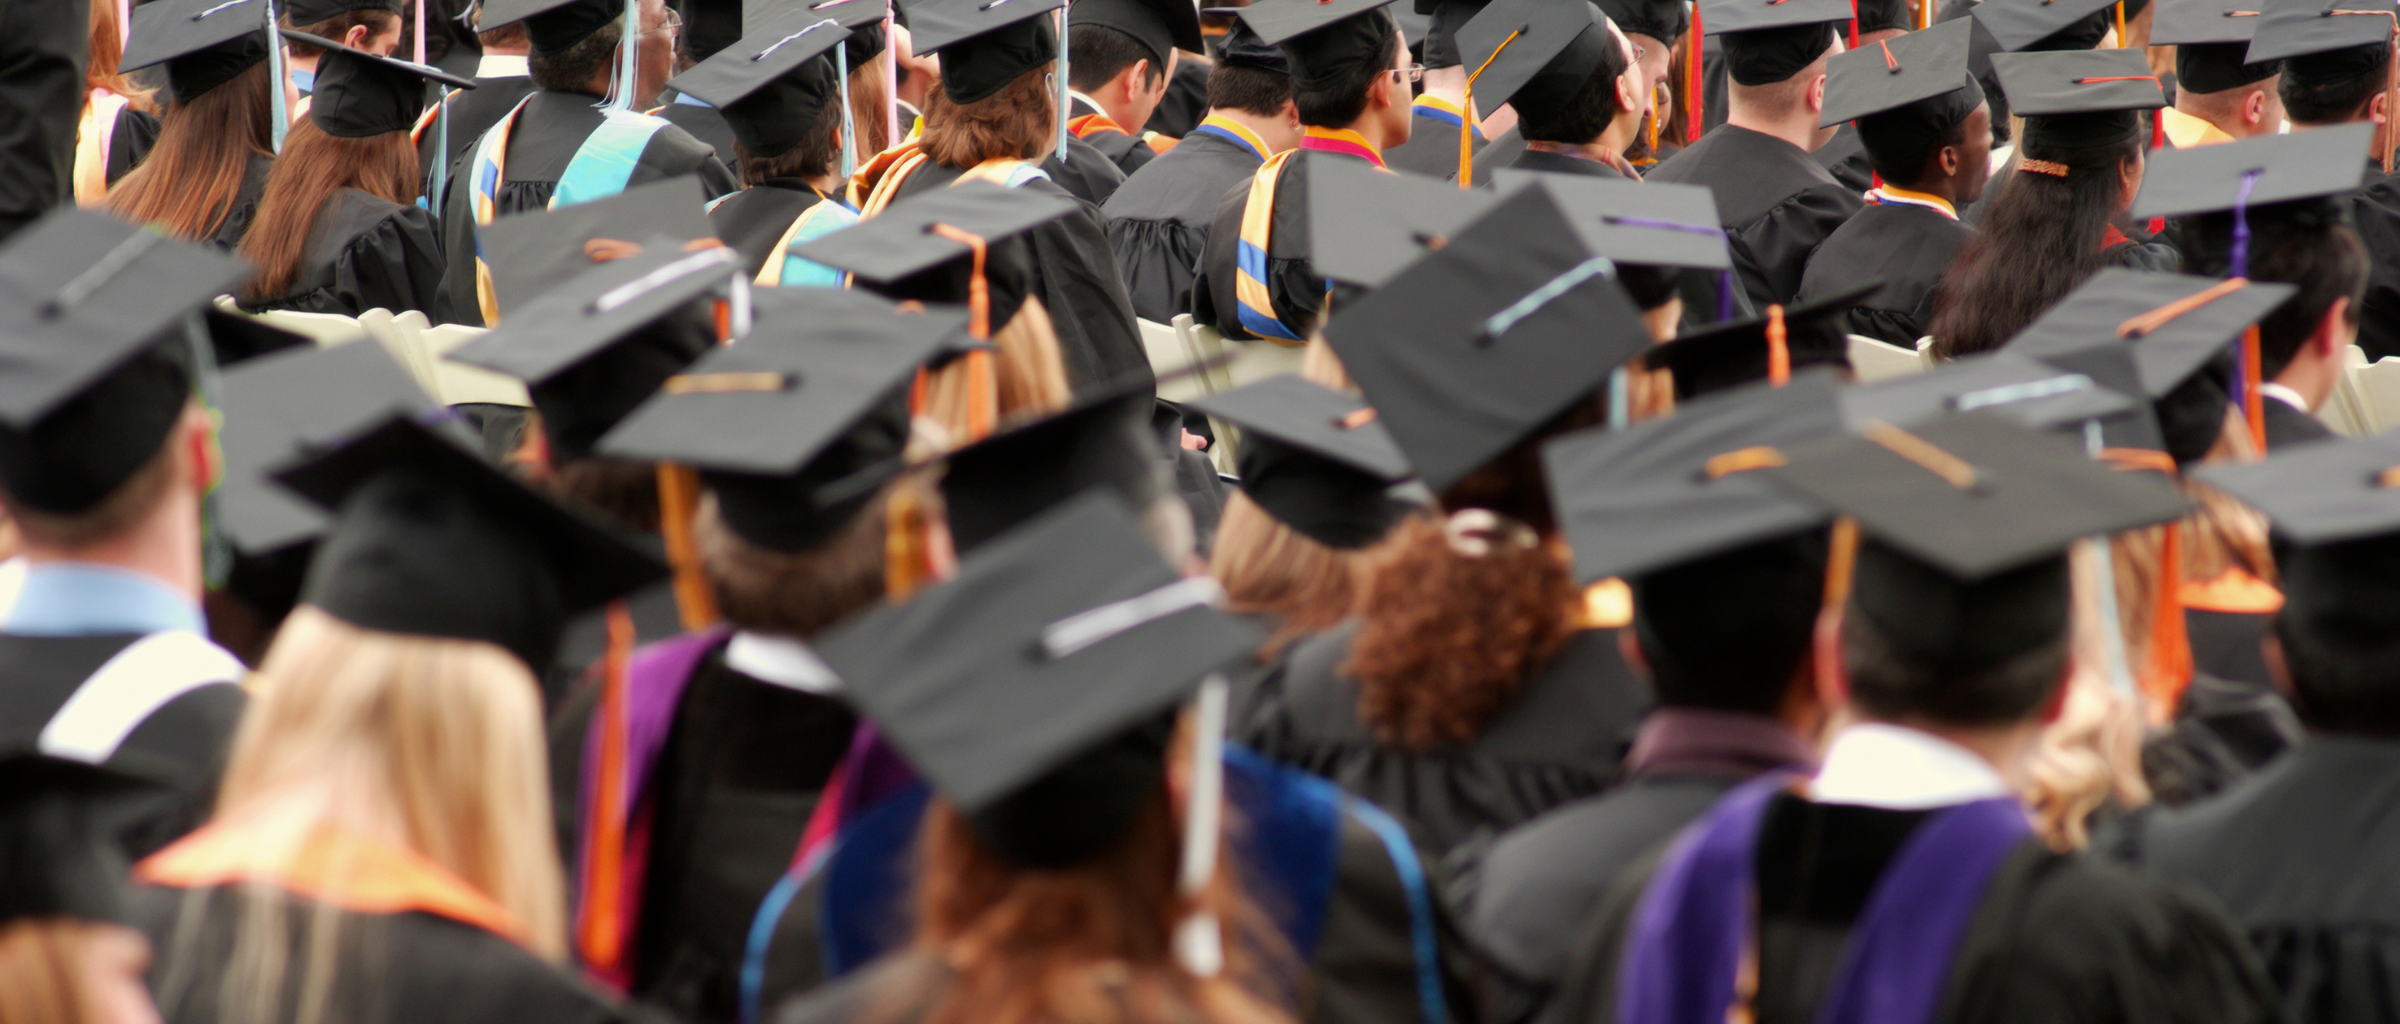 Large group of people wearing graduation caps and gowns